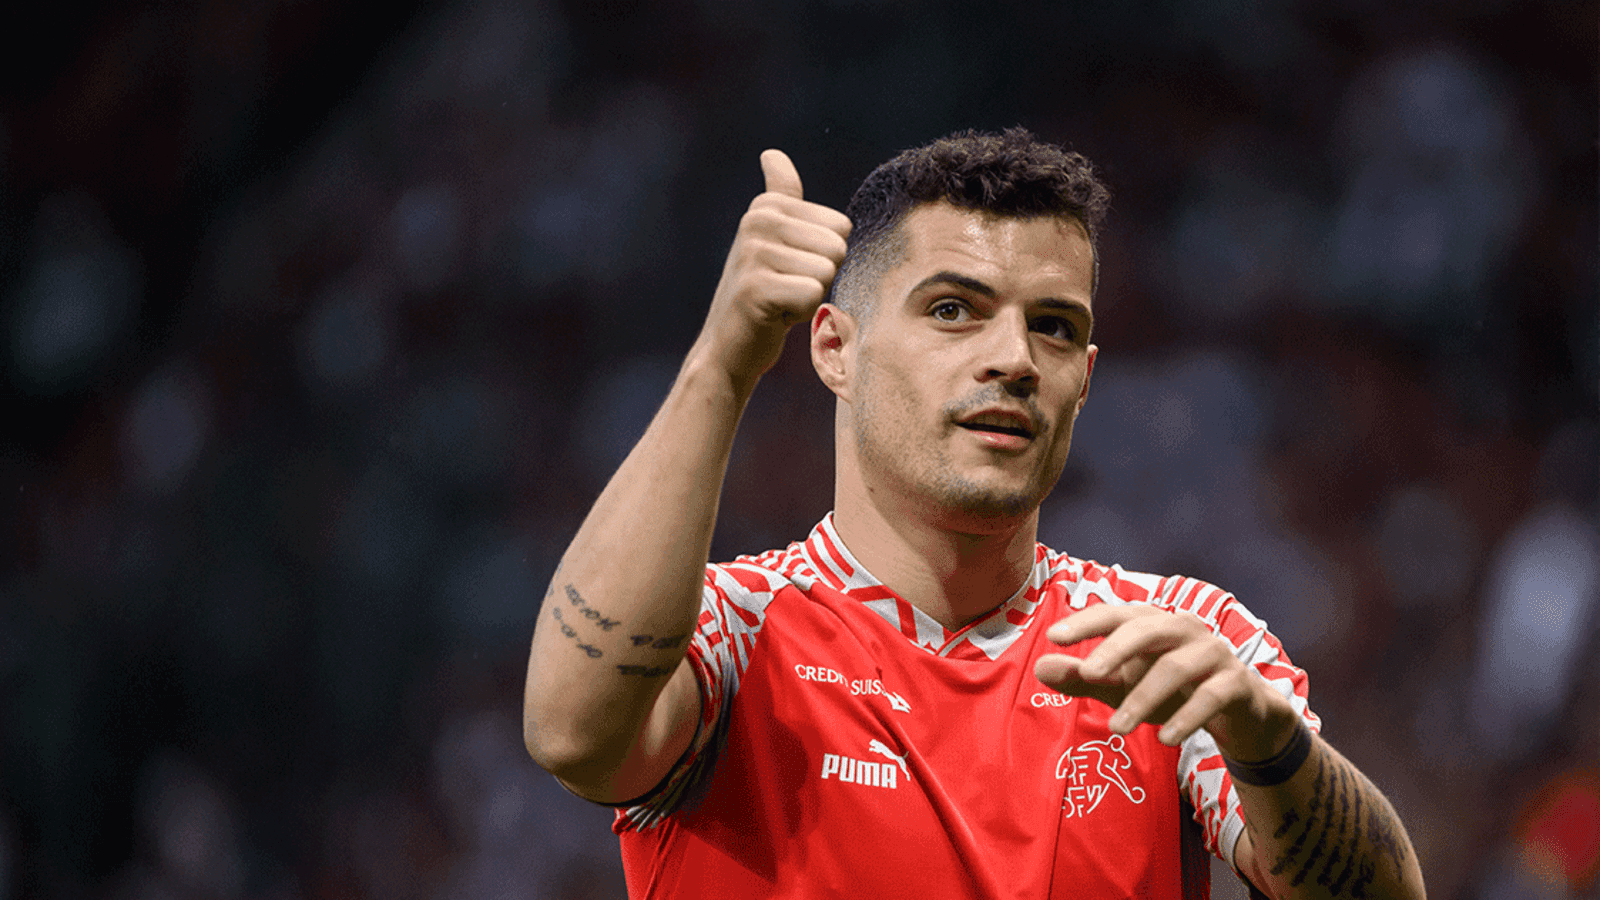 Xhaka to lead Switzerland at 2022 World Cup